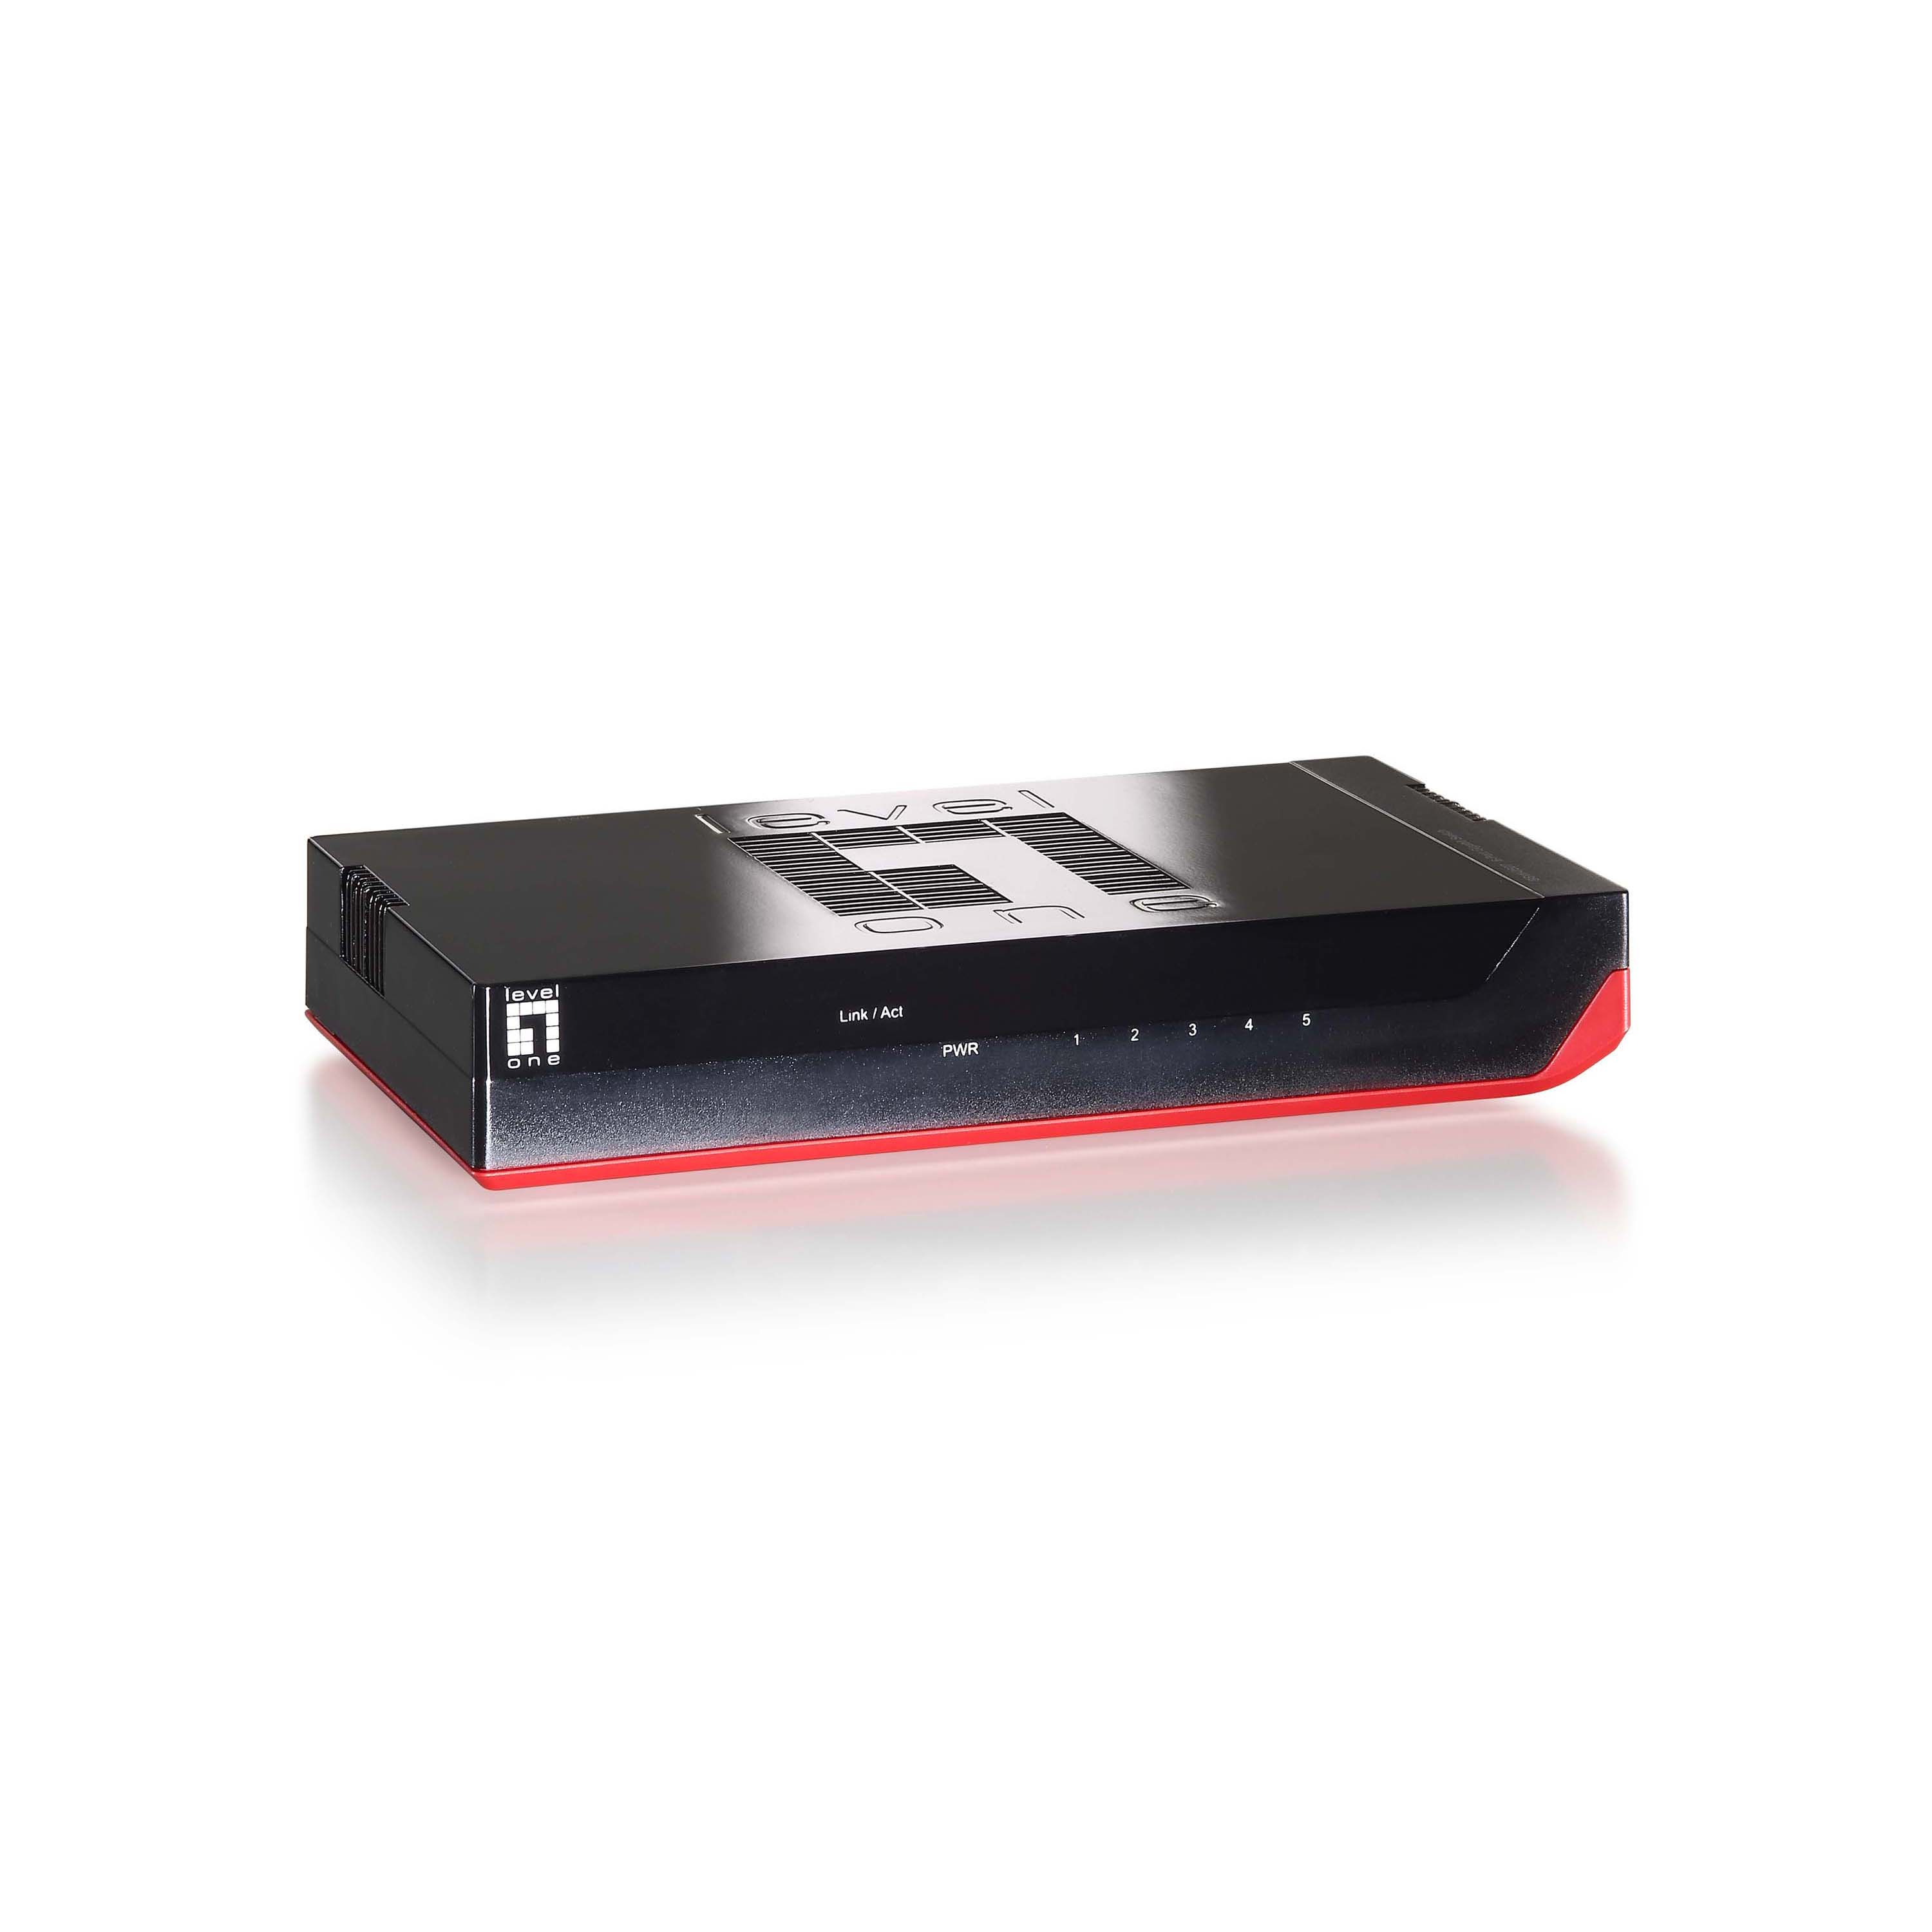 5 port Gigabit Ethernet Switch, Black w/ Red, IEEE 802.3az - Click Image to Close